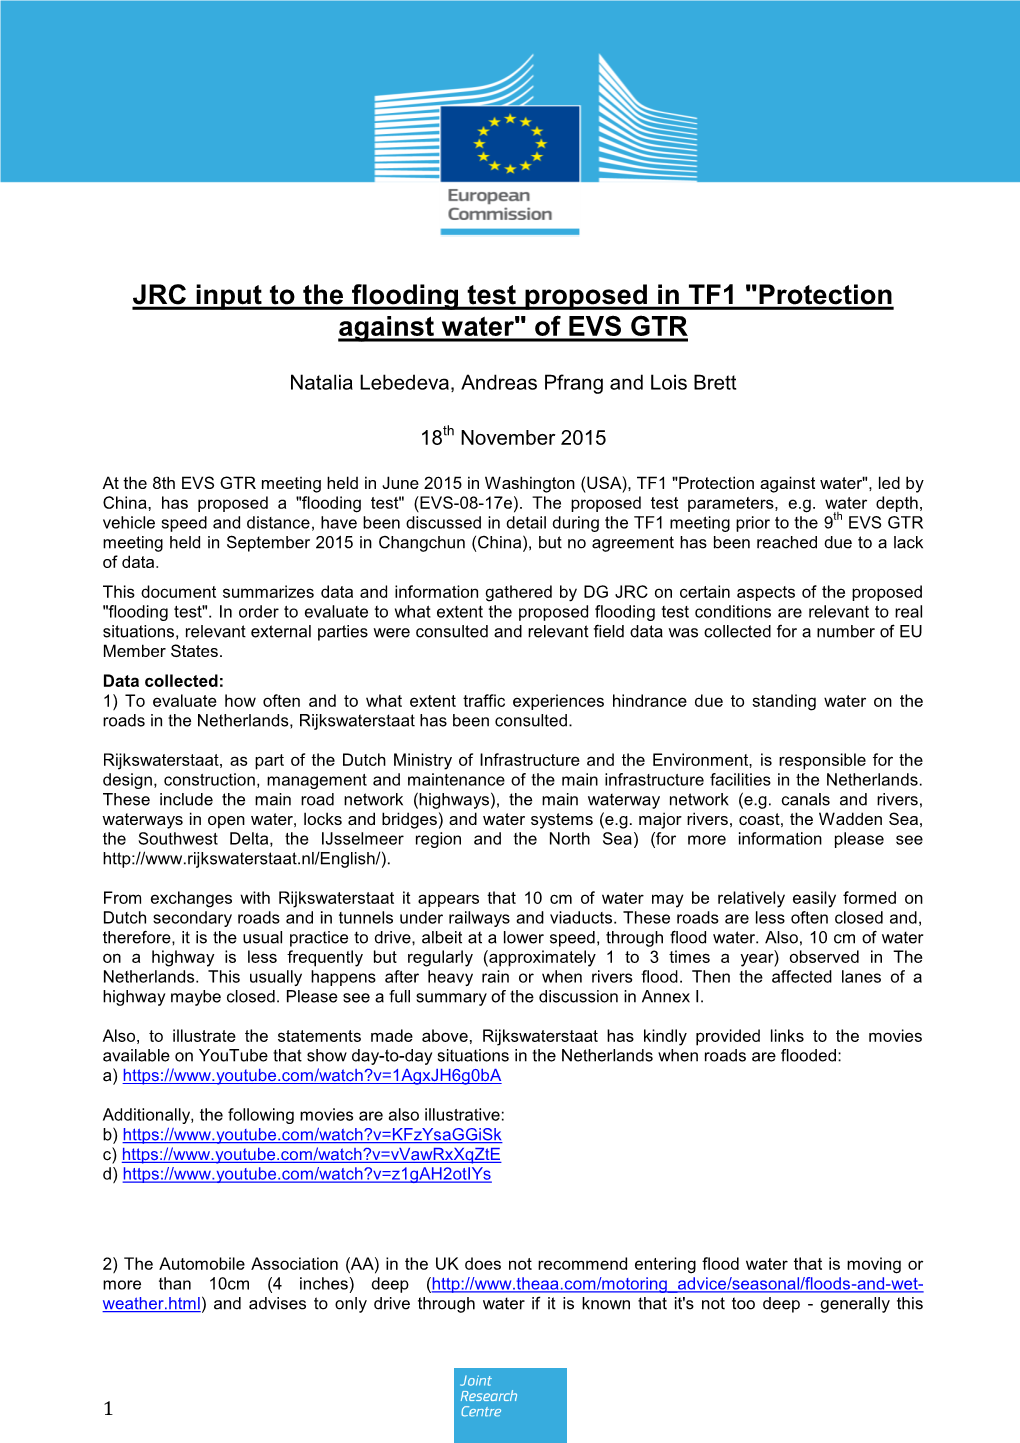 JRC Input to the Flooding Test Proposed in TF1 "Protection Against Water" of EVS GTR